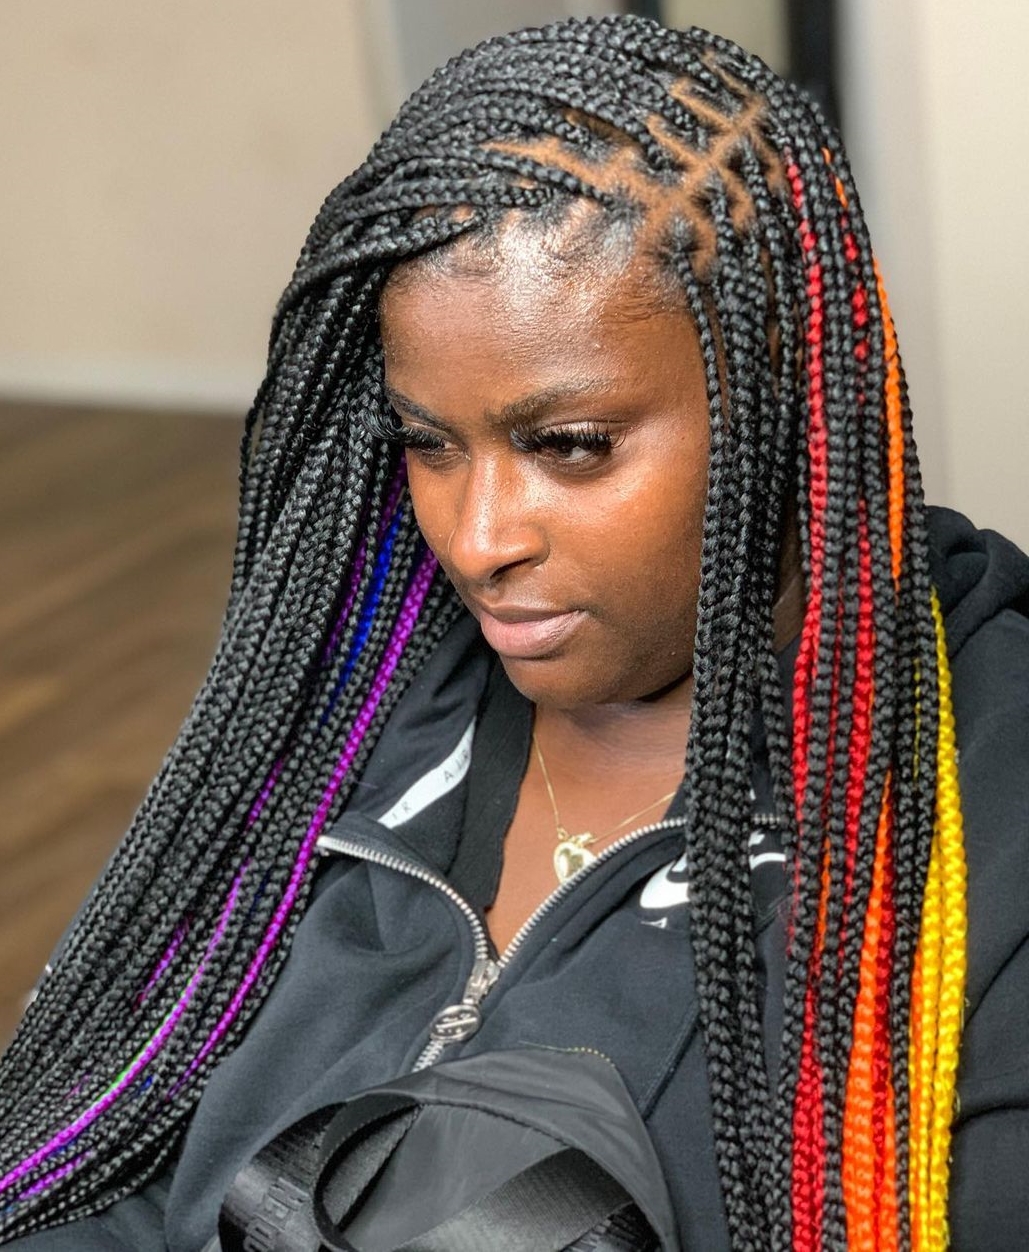 Multi-colored Skunk Stripe with Fulani Braid Hairstyle